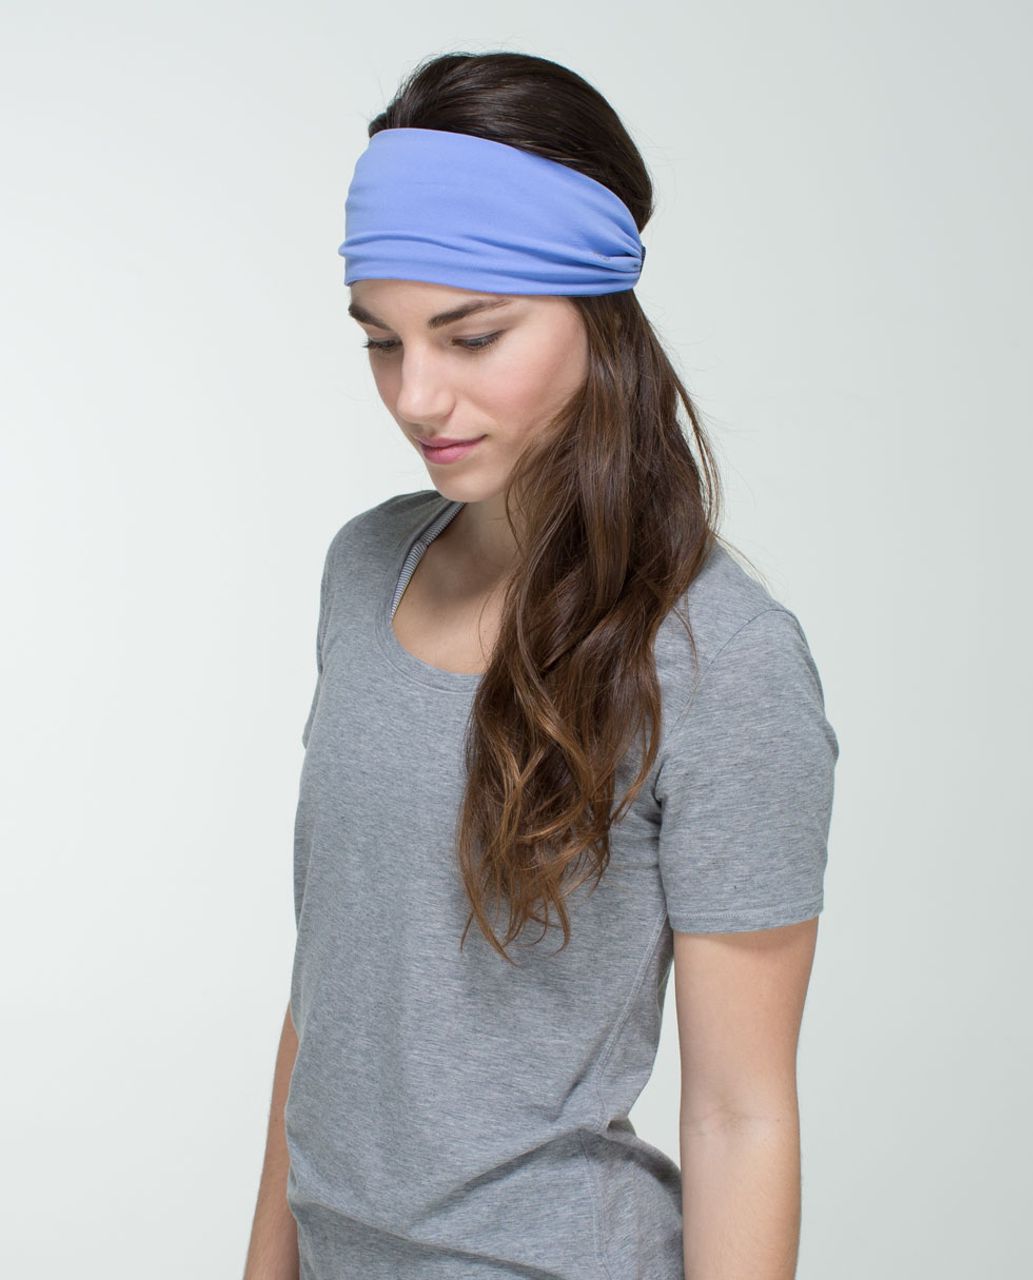 Lululemon Bang Buster Headband *Reversible - Wee Are From Space Cadet Blue / Lullaby